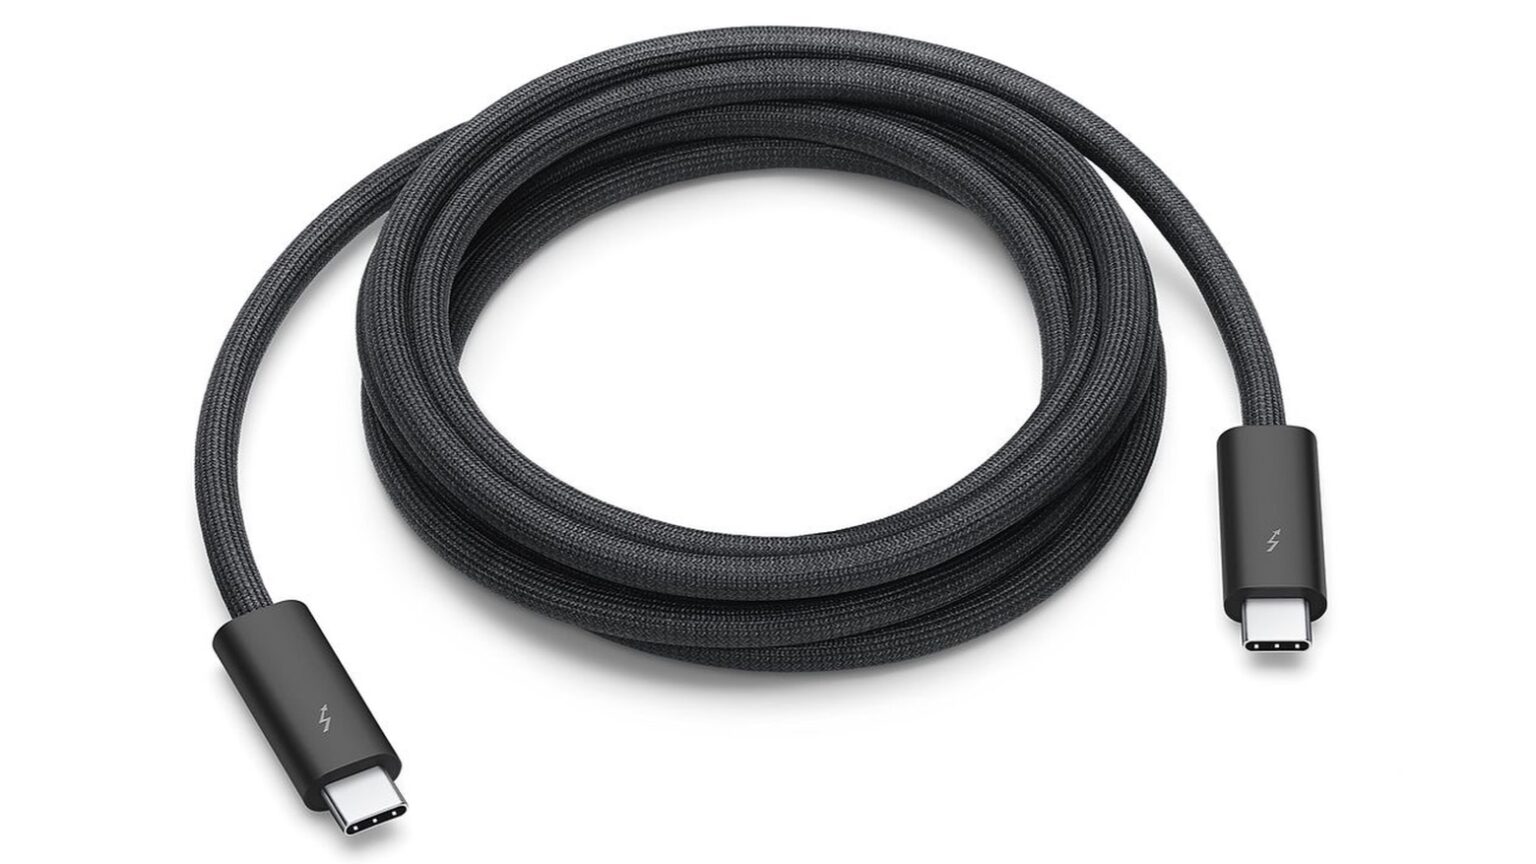 Is the Apple Thunderbolt 3 cable the best on the market? Or just the most expensive?